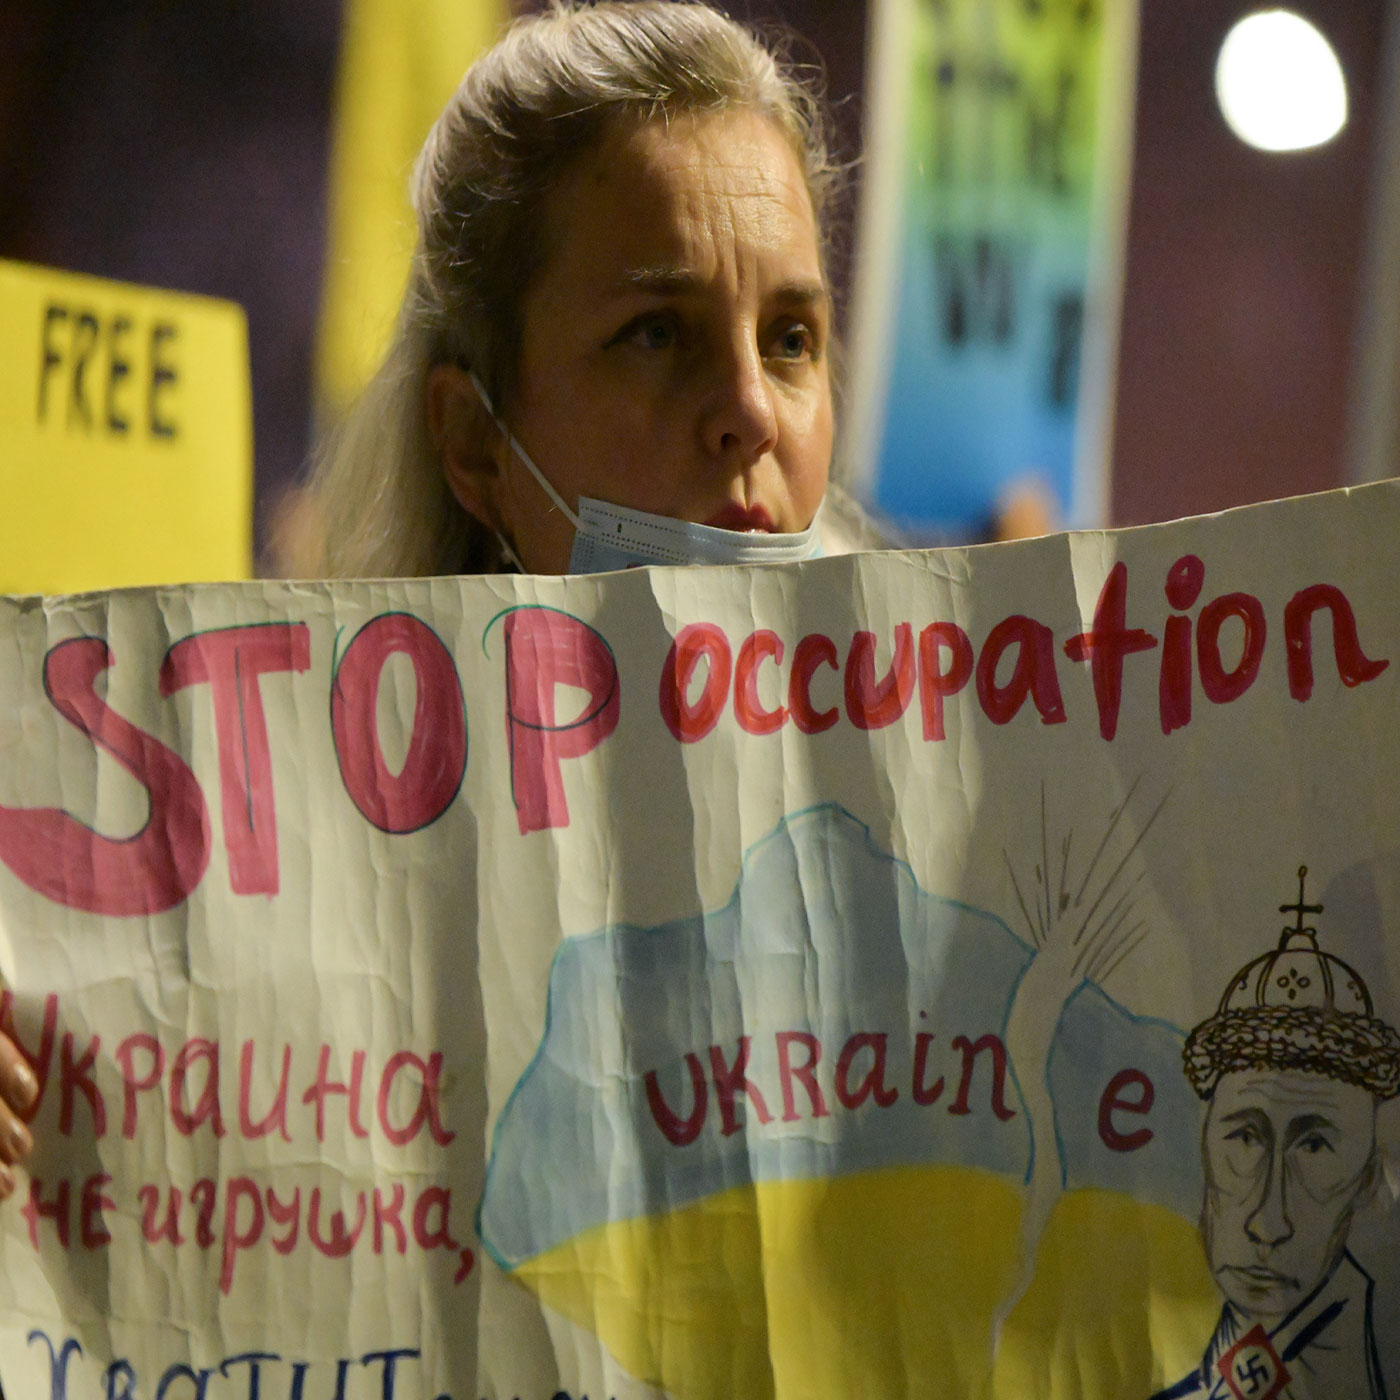 Photo is a blond woman with a mask down near her mouth, she is holding a sign that says "Stop Occupation" in red letters.